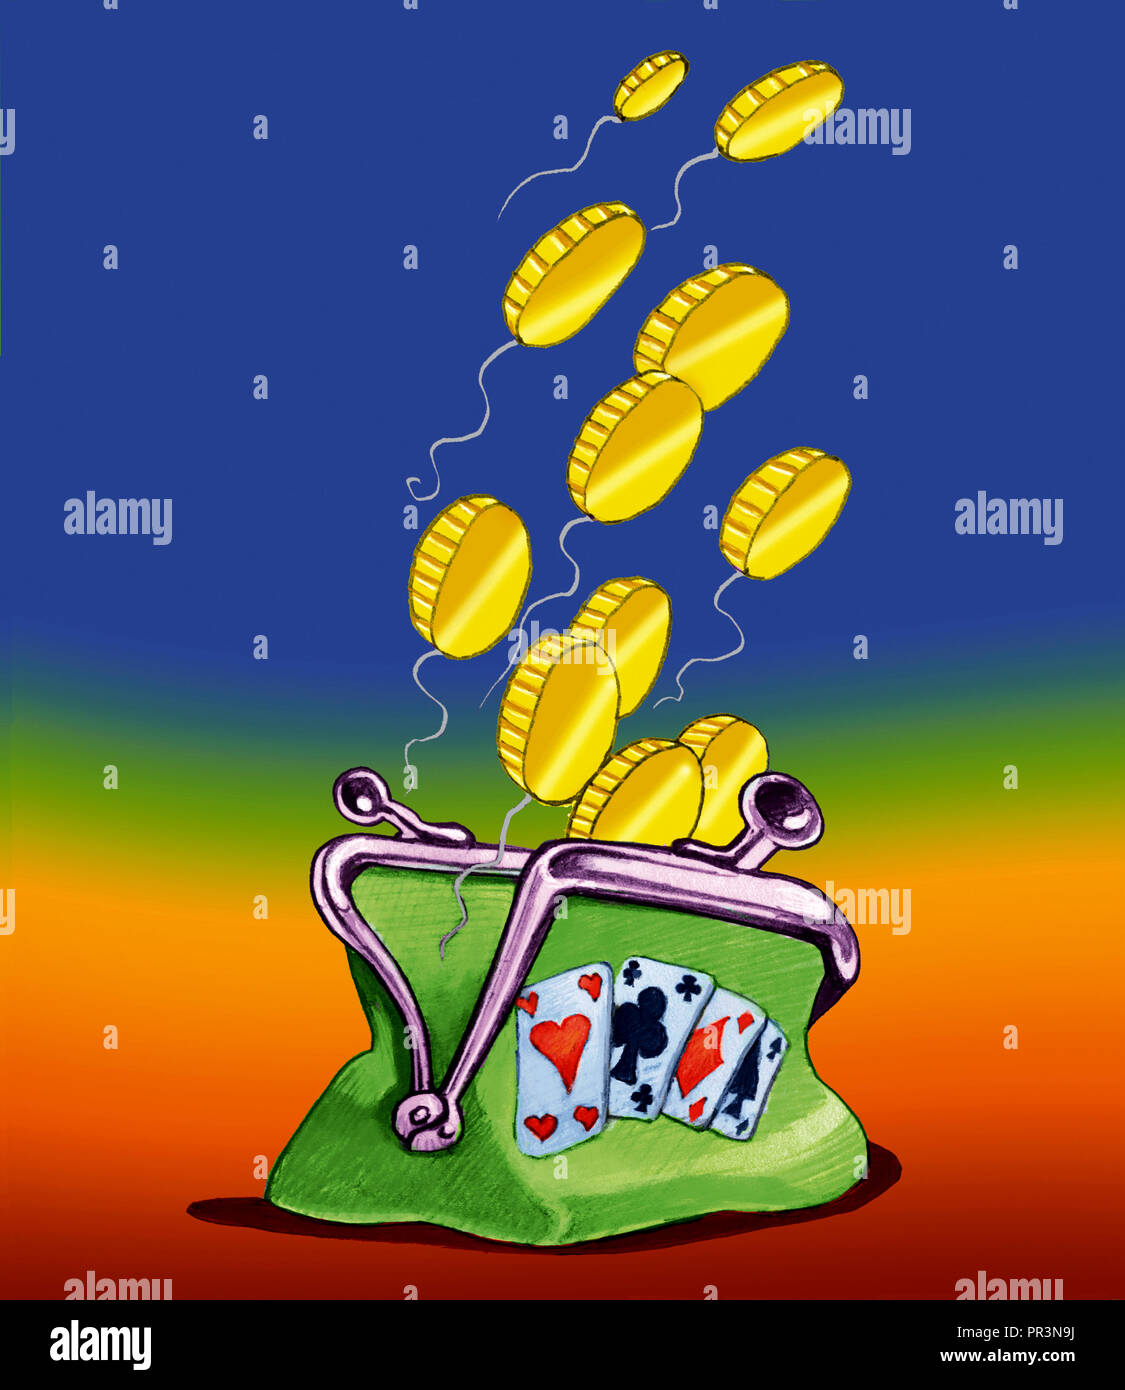 from an open wallet fly away coins as light toy balloons allegory of spent in gamvling conceptual illustration Stock Photo